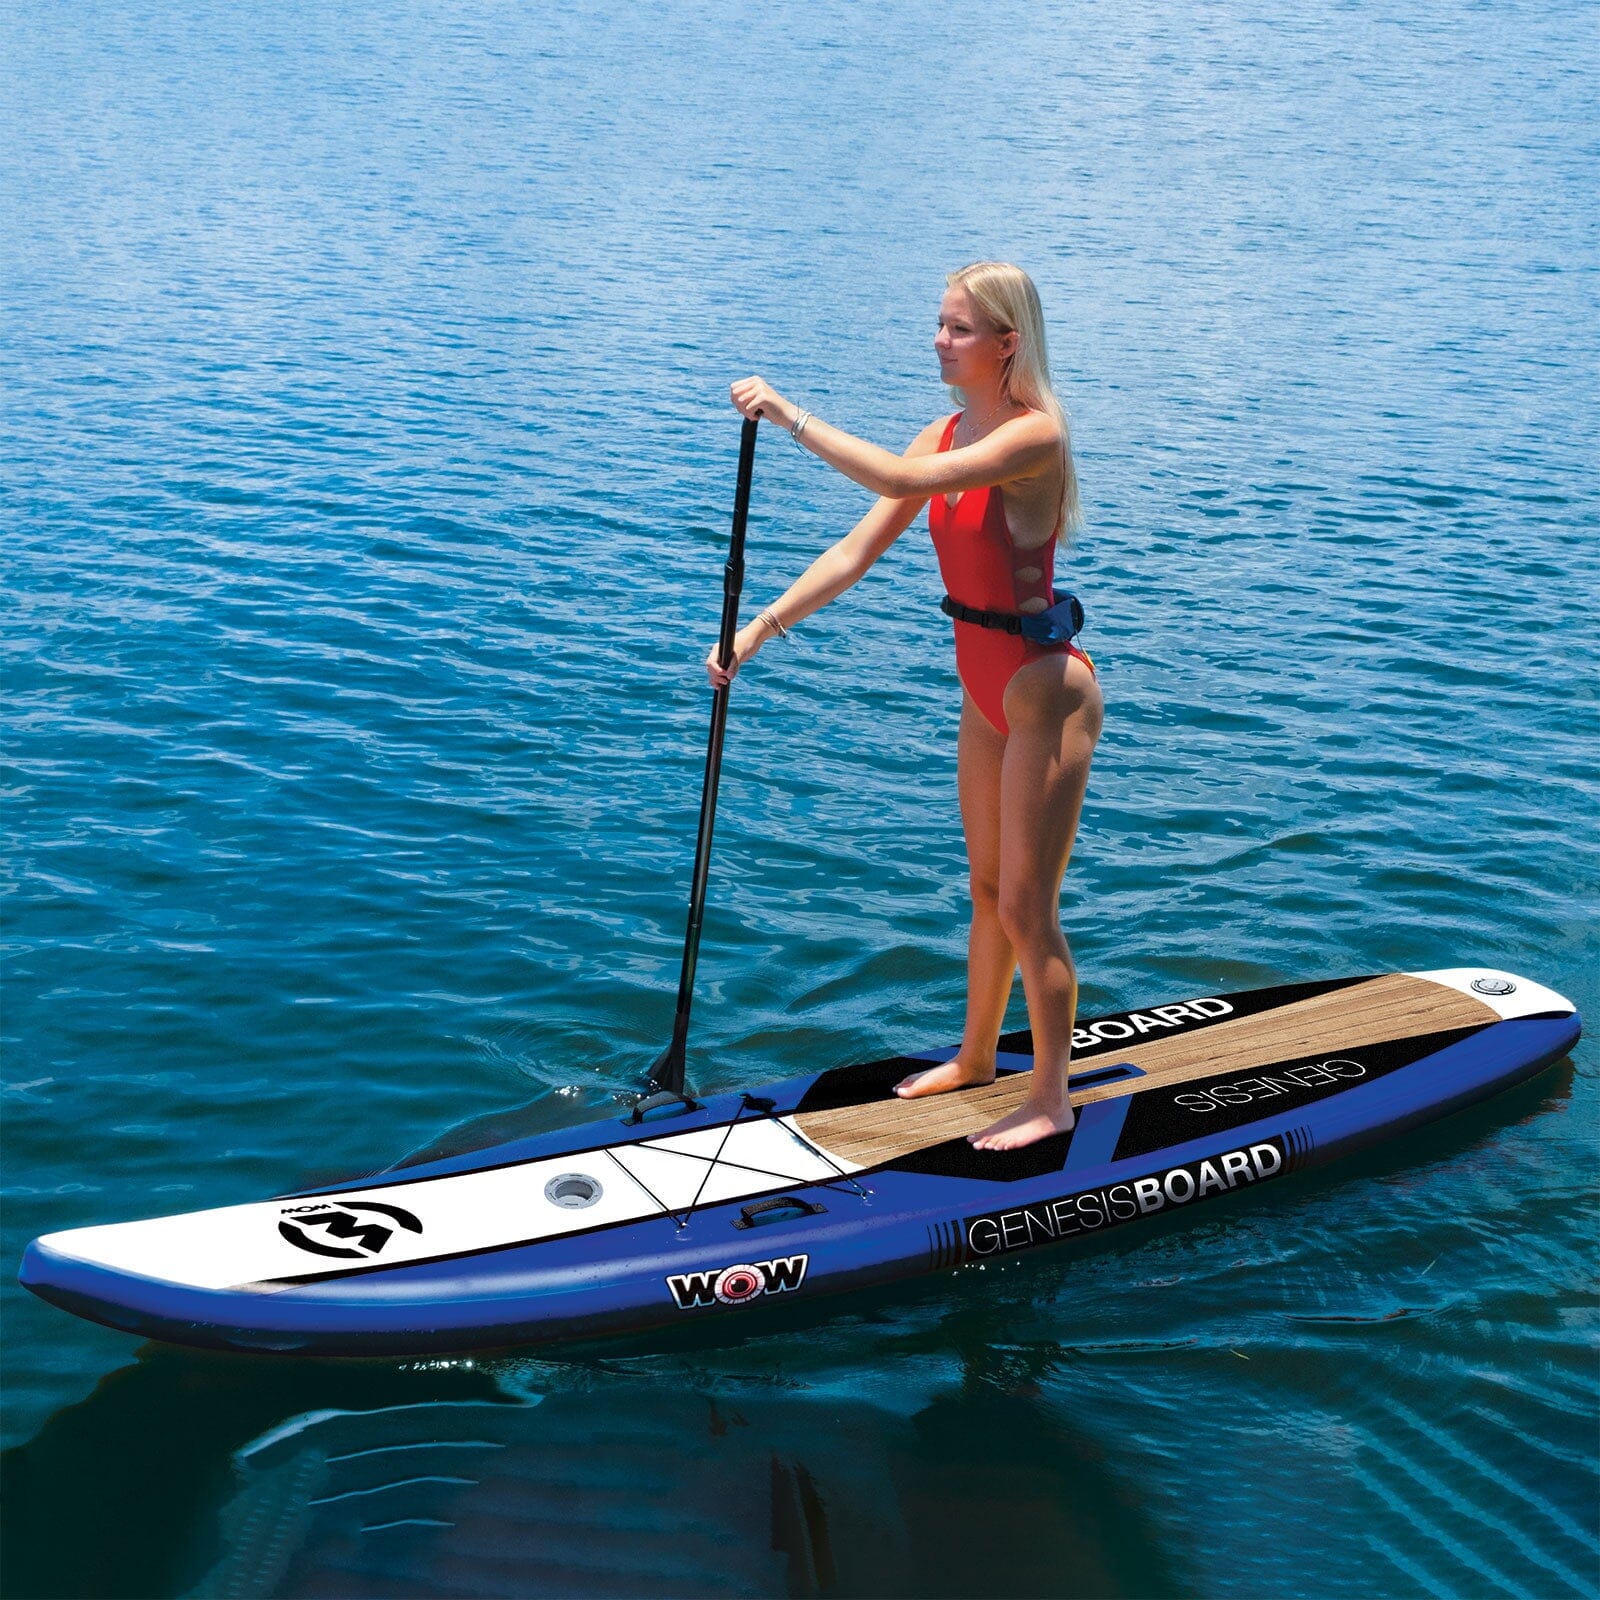 SUP - Stand Up Paddle Boarding